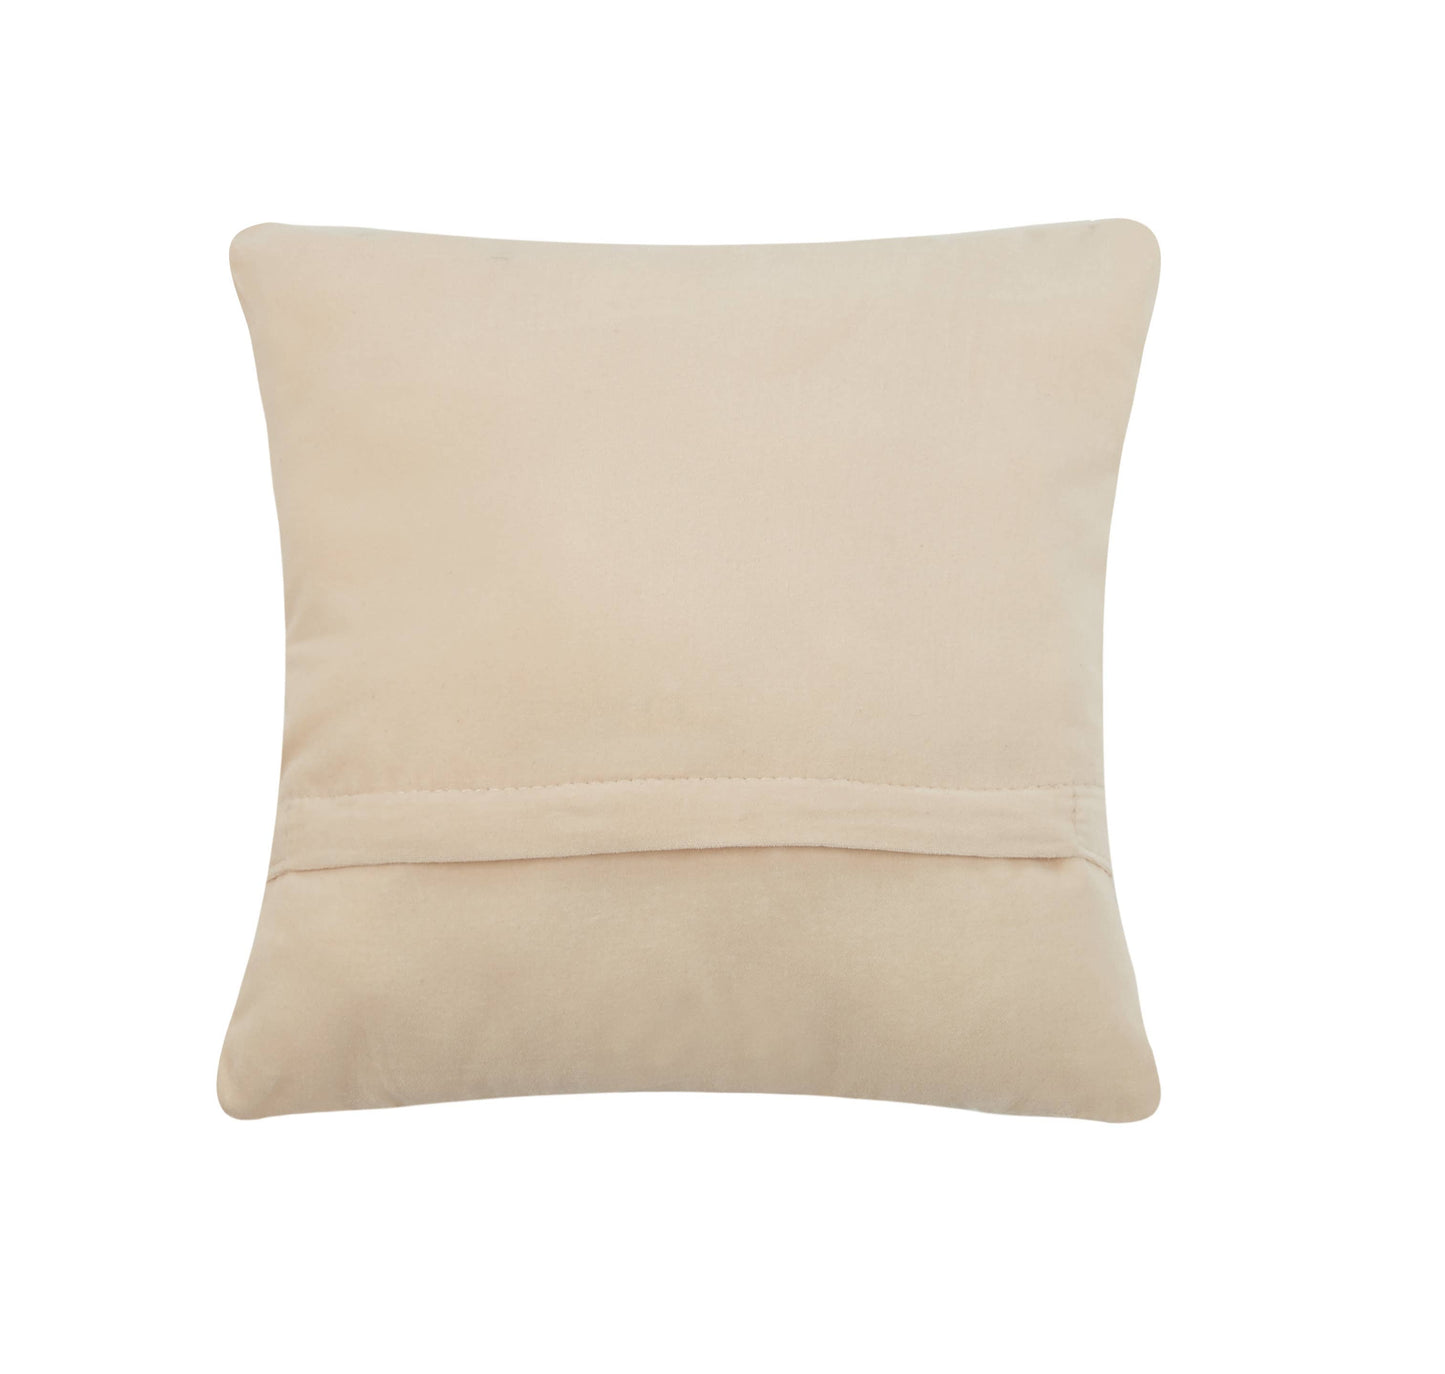 Off Duty With Tassels Hook Pillow